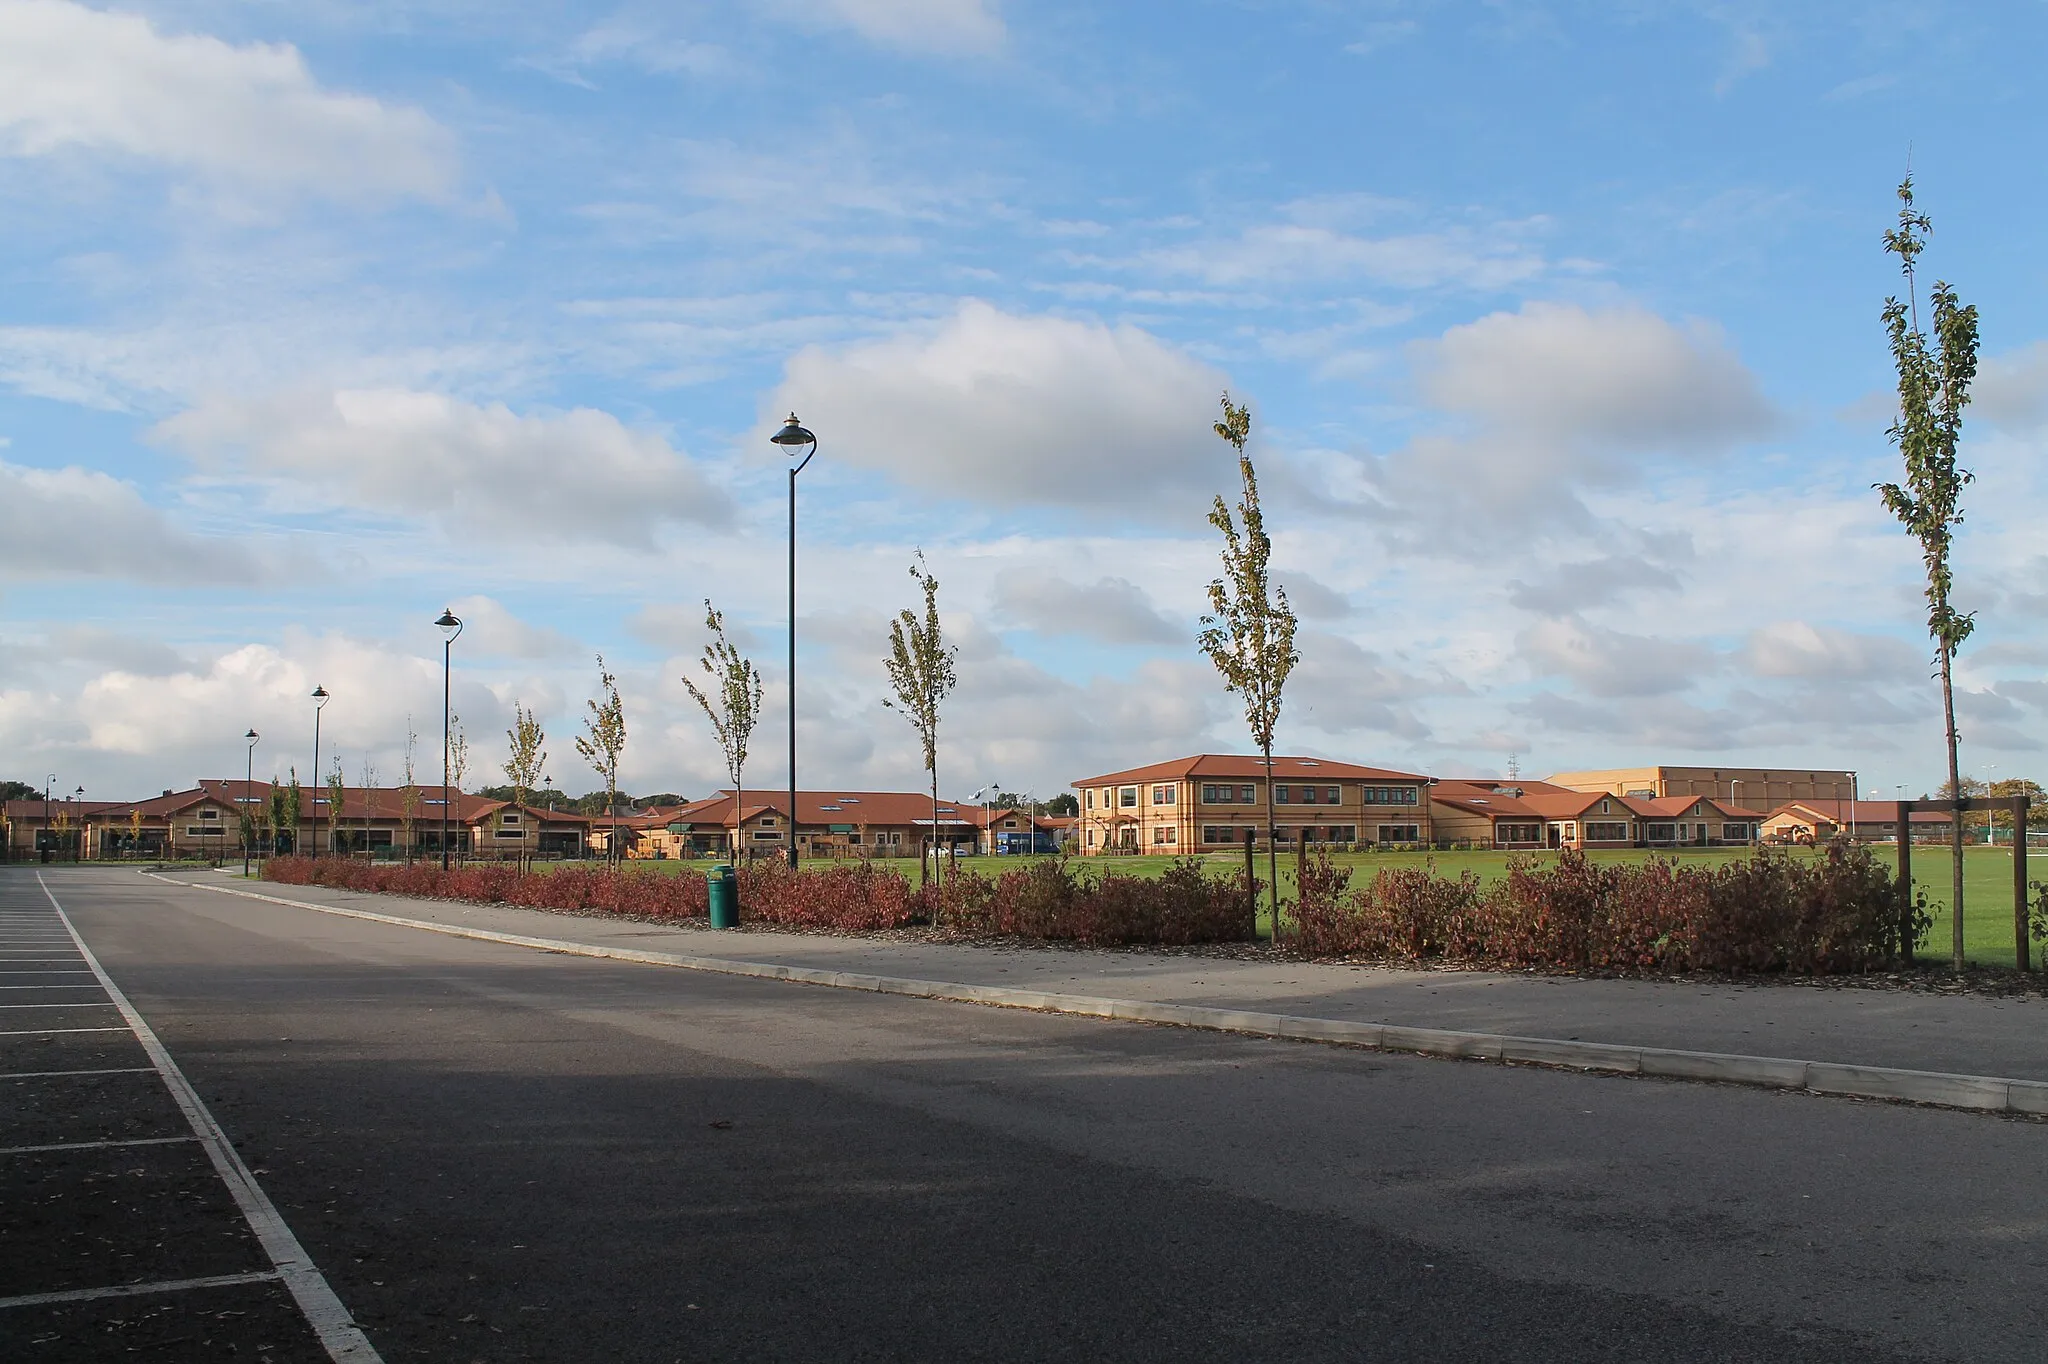 Photo showing: The Priory Academy School